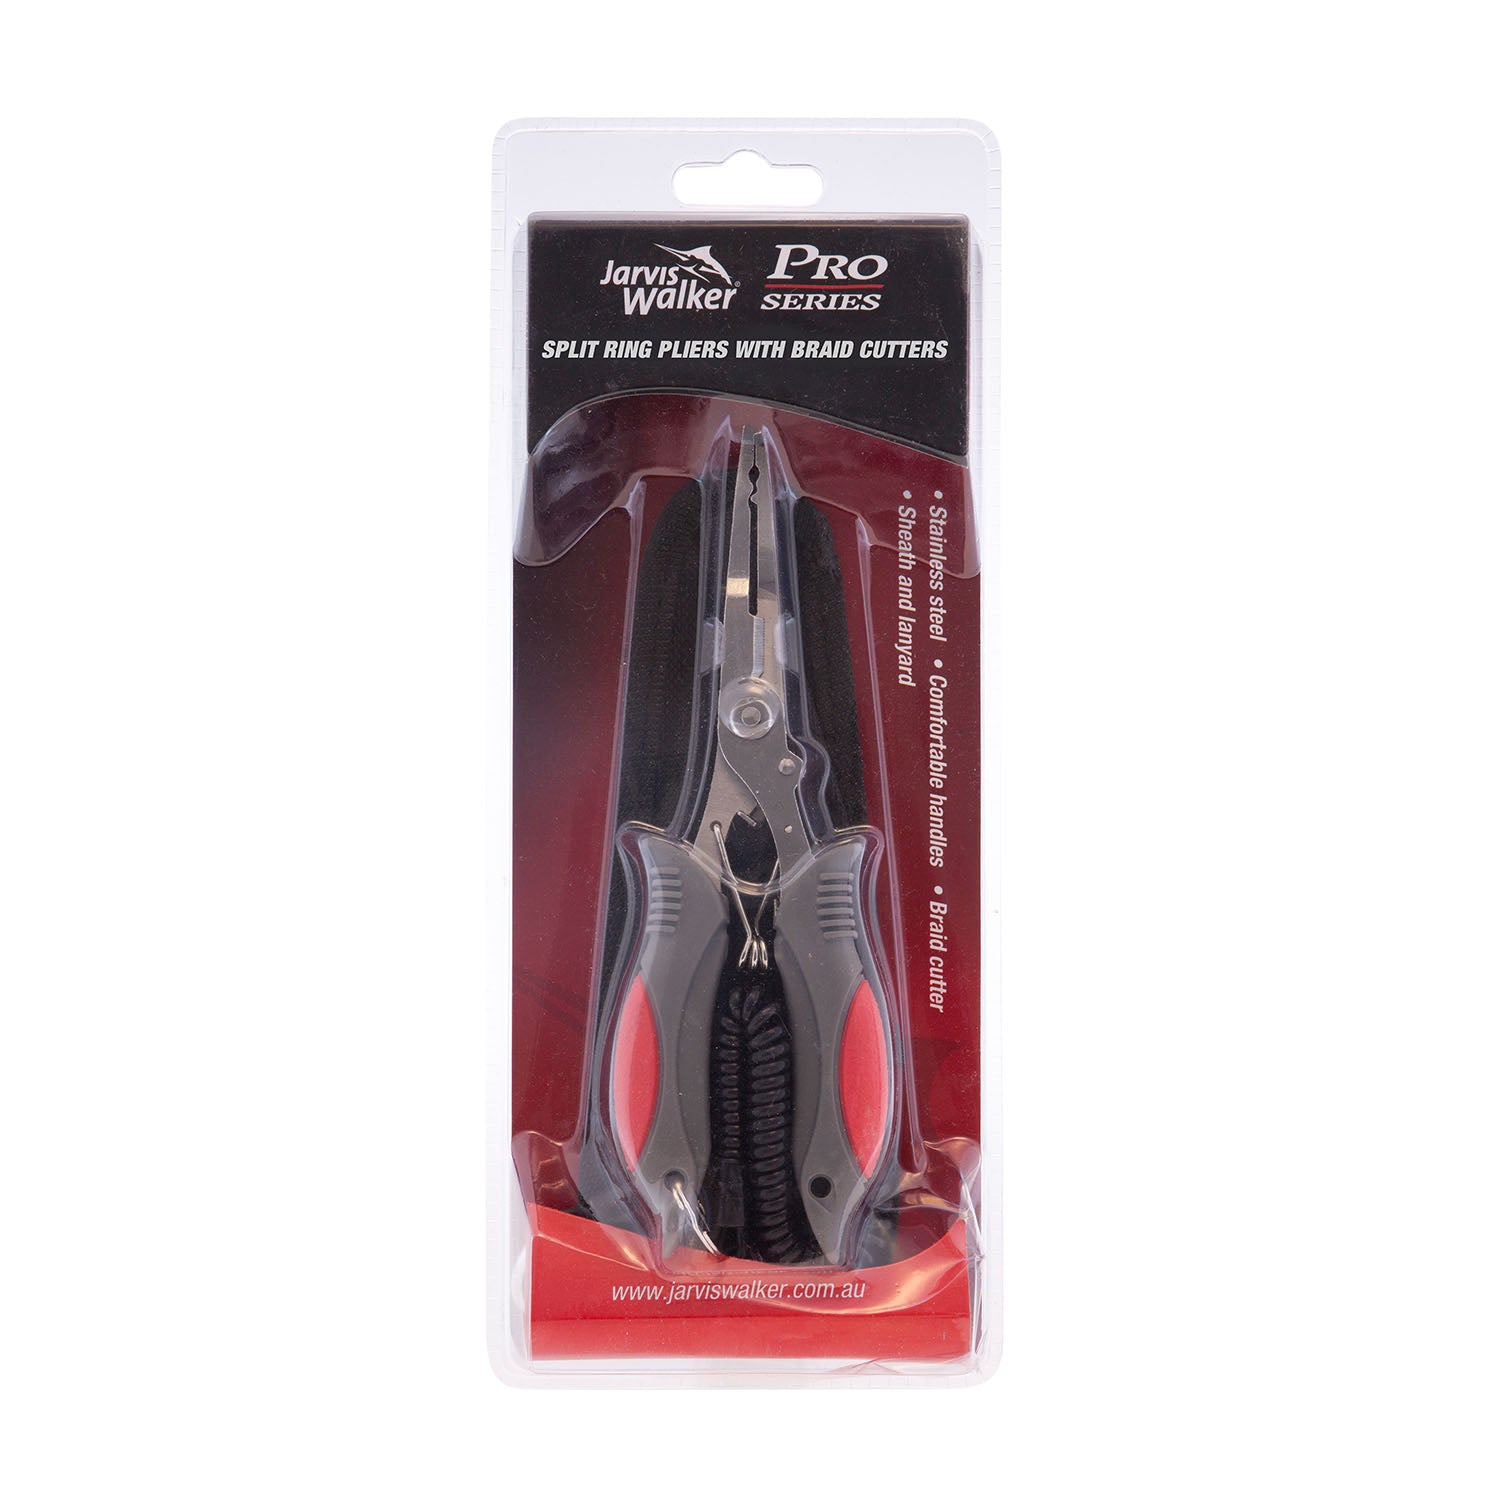 Pro Series Split Ring Pliers with Braid Cutter